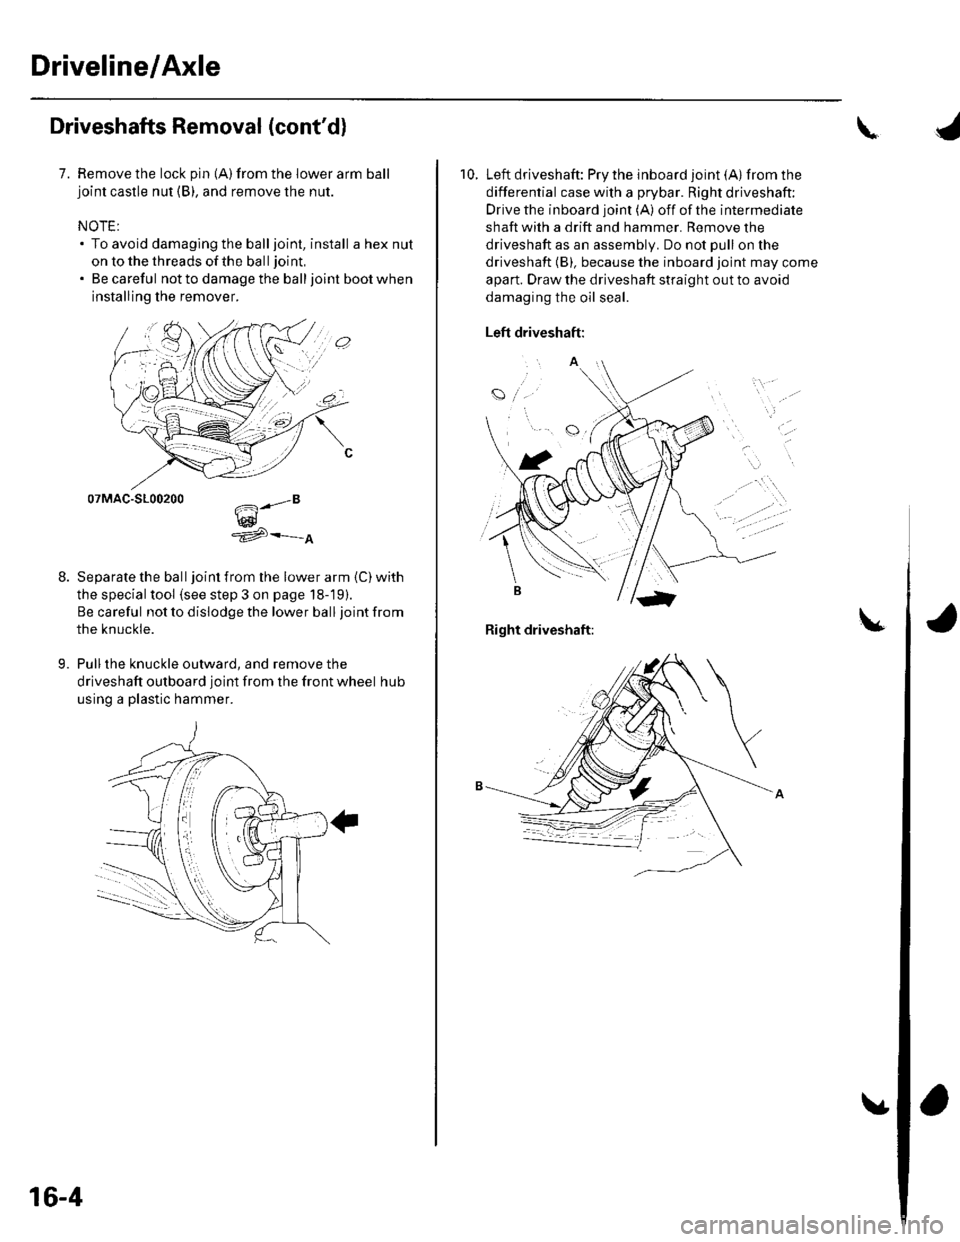 HONDA CIVIC 2003 7.G Workshop Manual Driveline/Axle
Driveshafts Removal (contd)
7. Remove the lock pin {A)from the lower arm balljoint castle nut (B), and remove the nut.
NOTE:. To avoid damaging the balljoint, install a hex nut
on to t